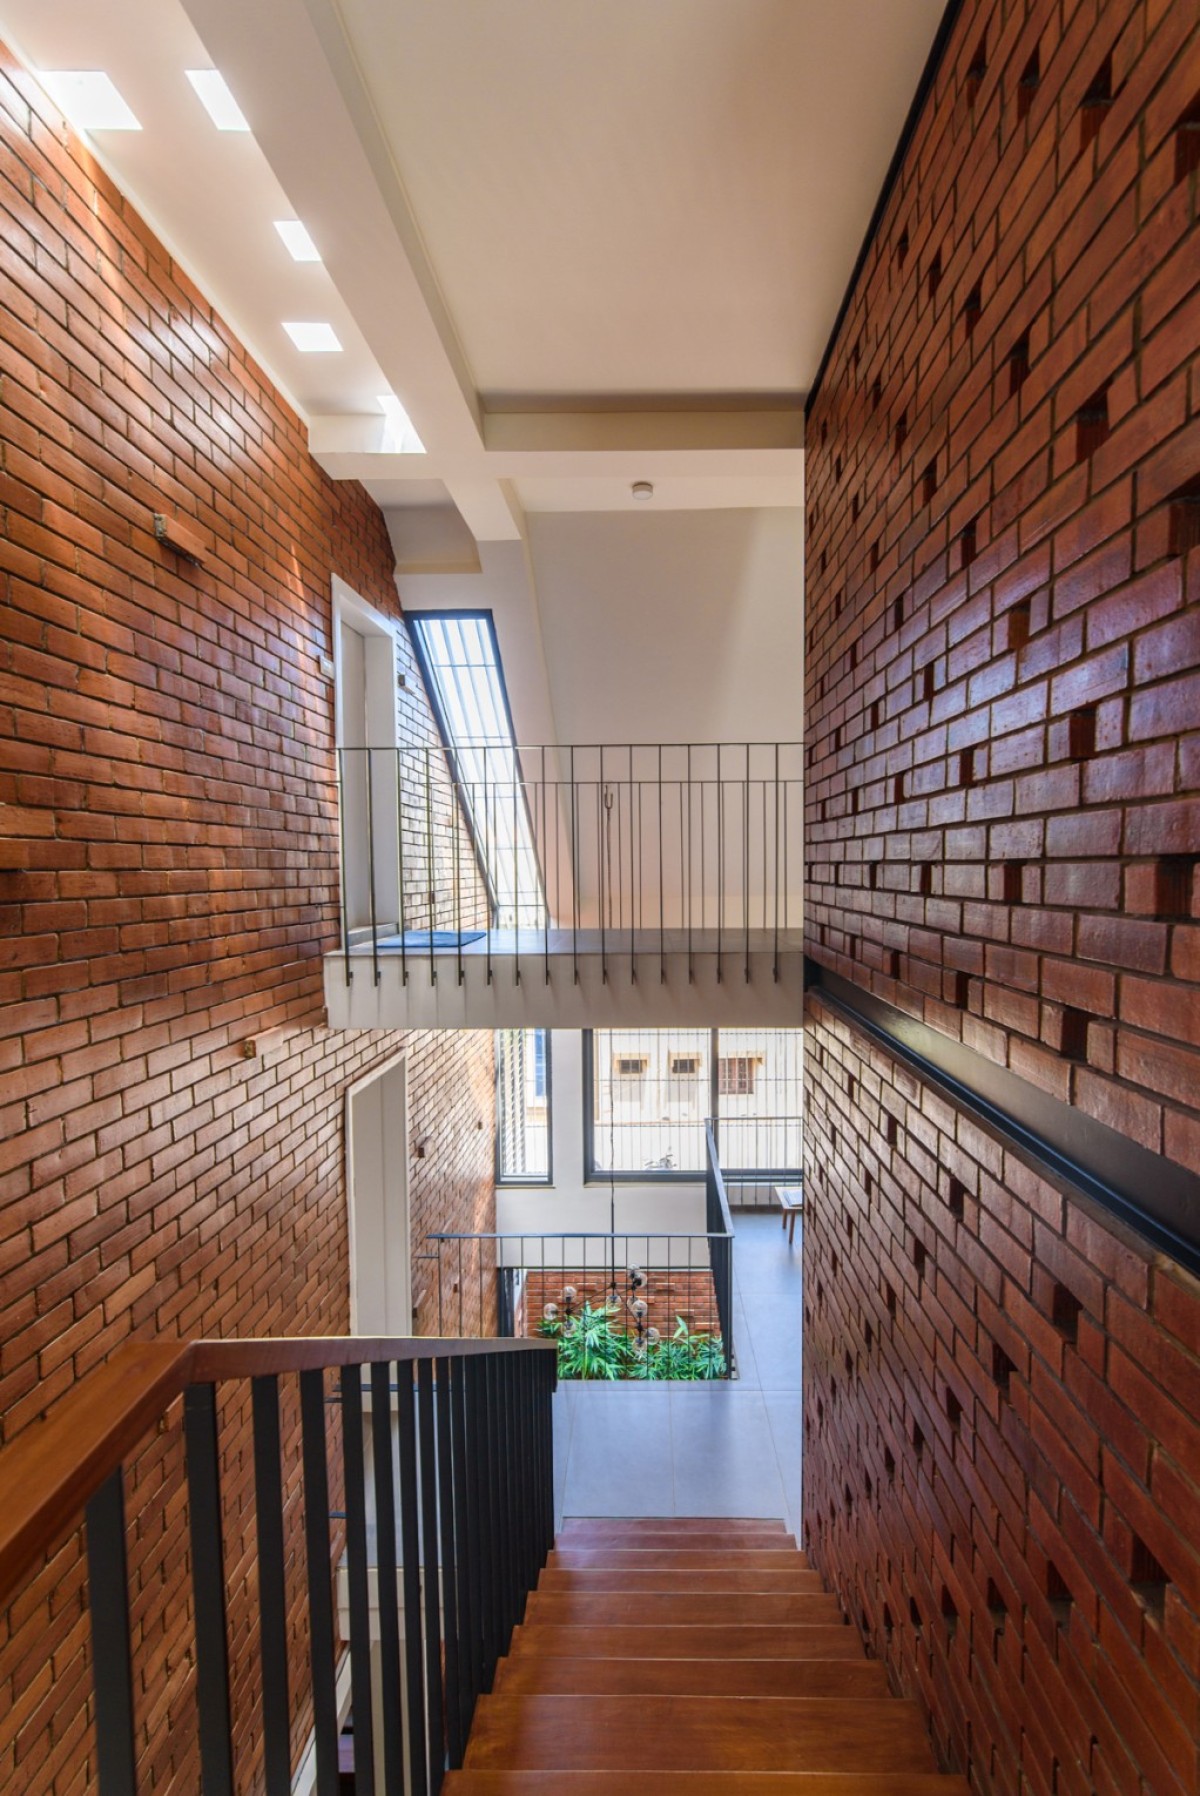 Staircase-a visually connected space within the staircase void of Corner Brick House by Jacob + Rathodi Architects